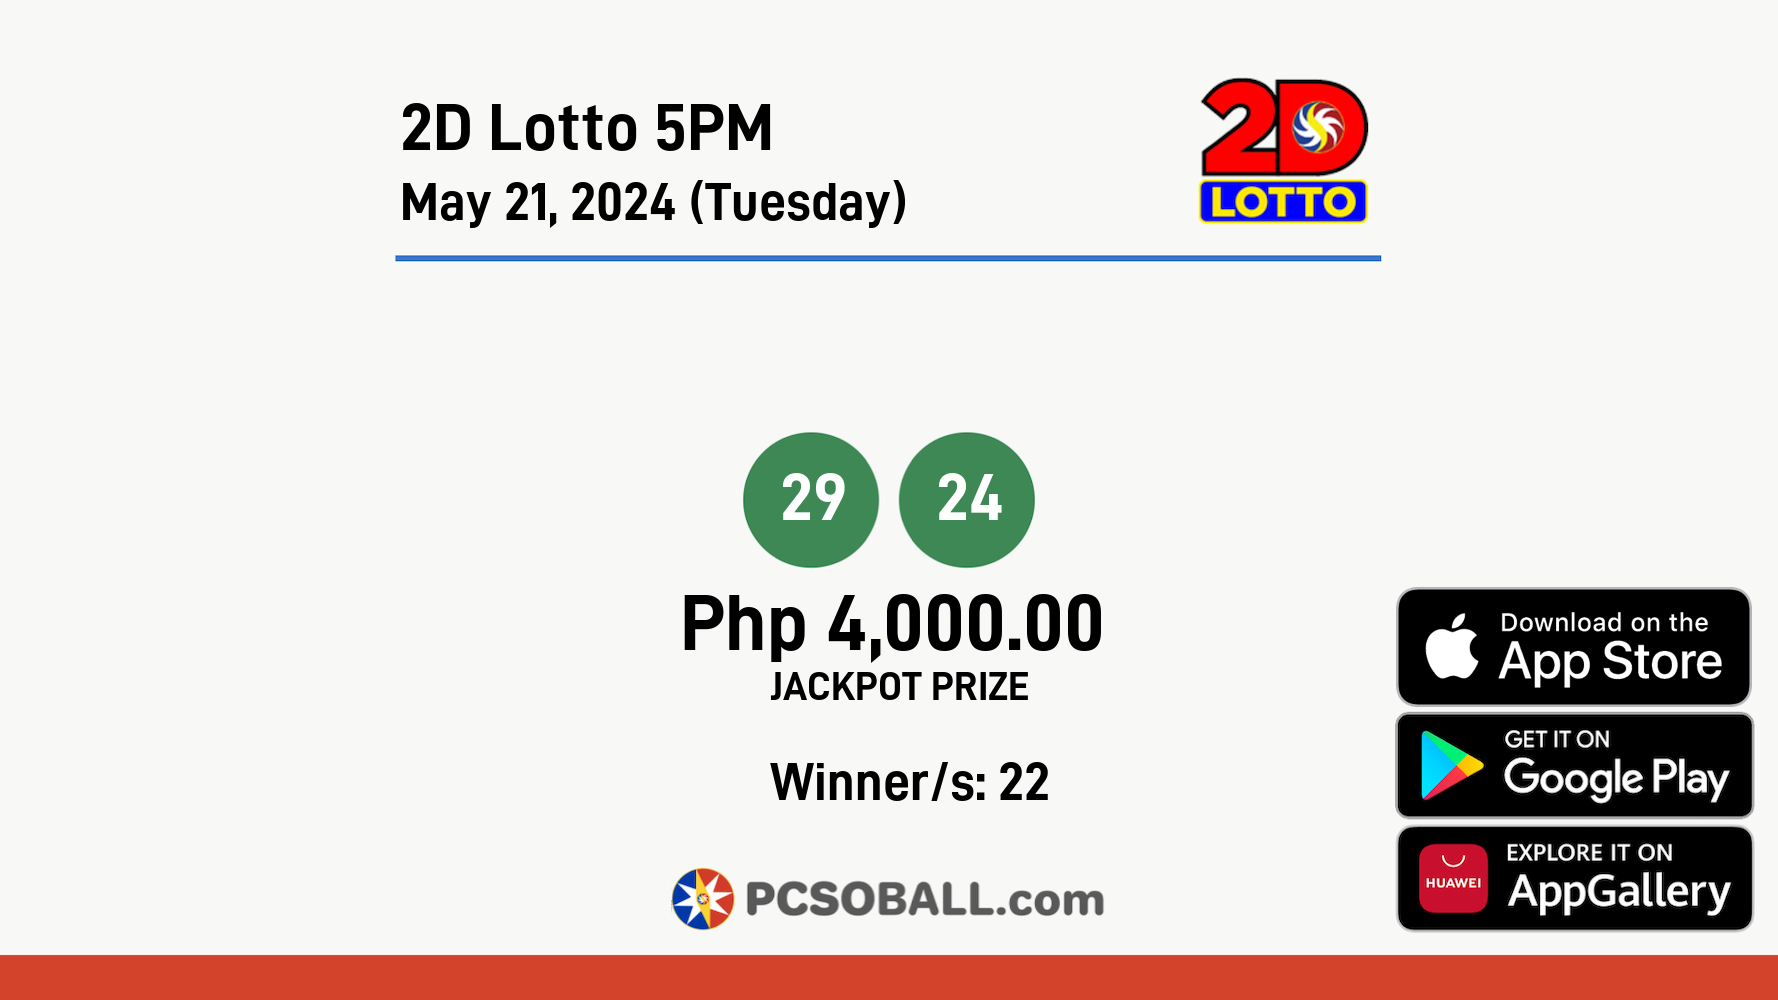 2D Lotto 5PM May 21, 2024 (Tuesday) Result